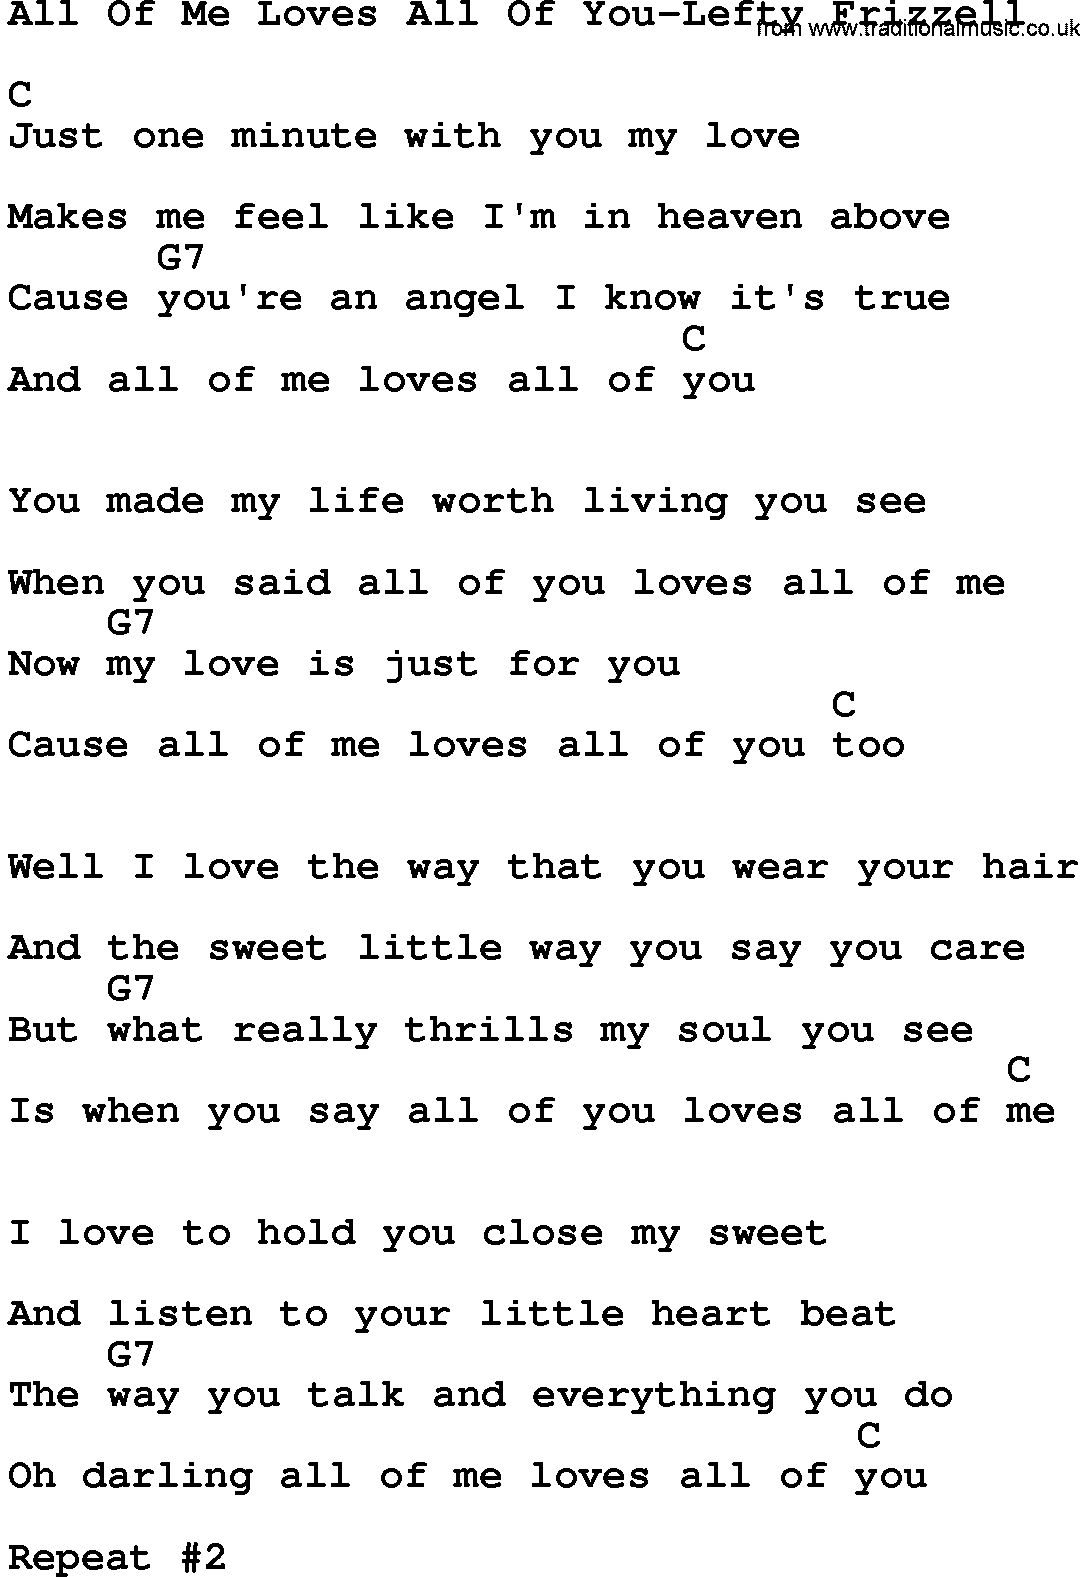 Country music song: All Of Me Loves All Of You-Lefty Frizzell lyrics and chords